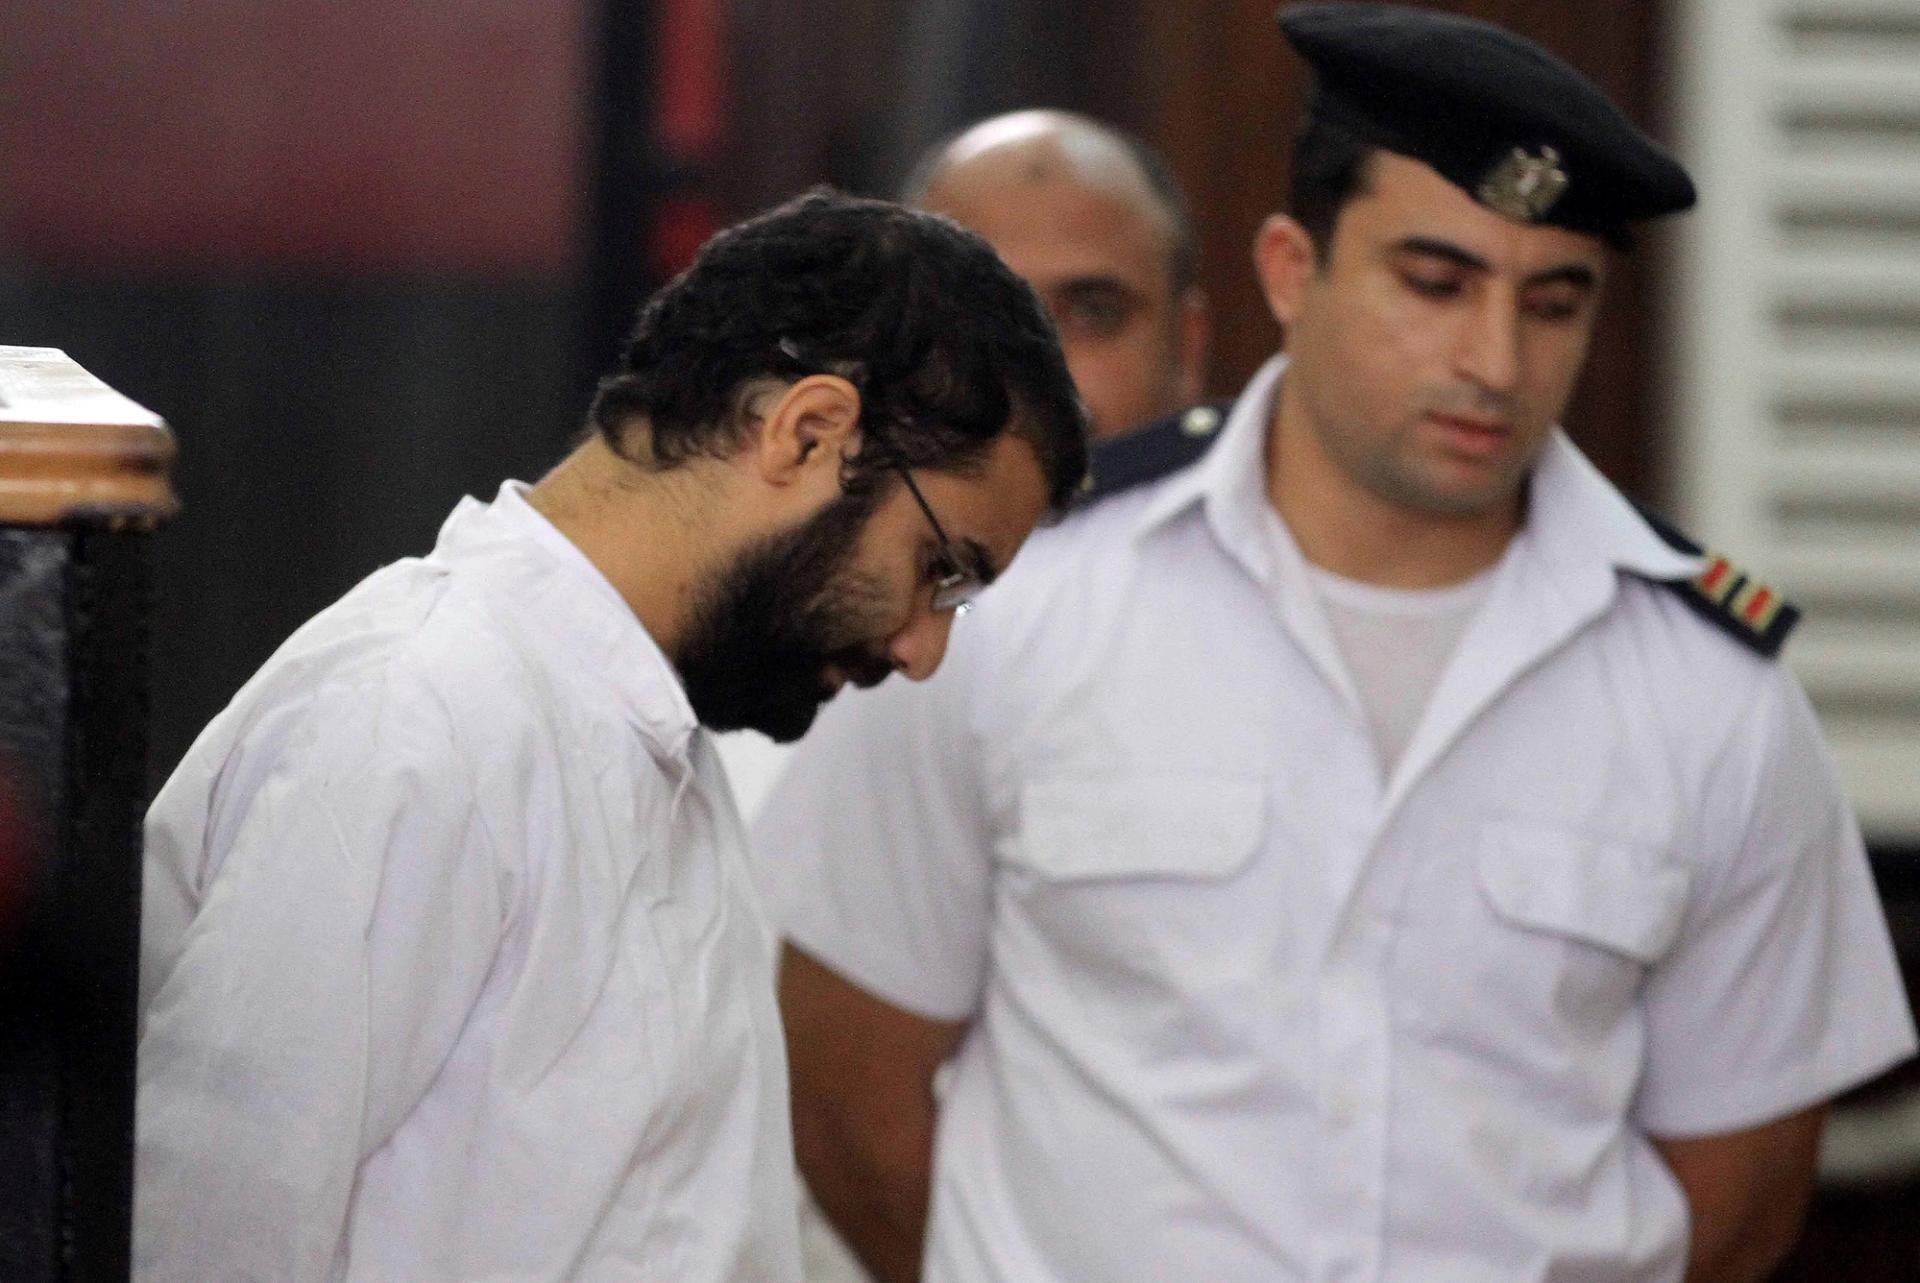 Activist Alaa Abd el-Fattah stands in front of a police officer at a court during his trial in Cairo.